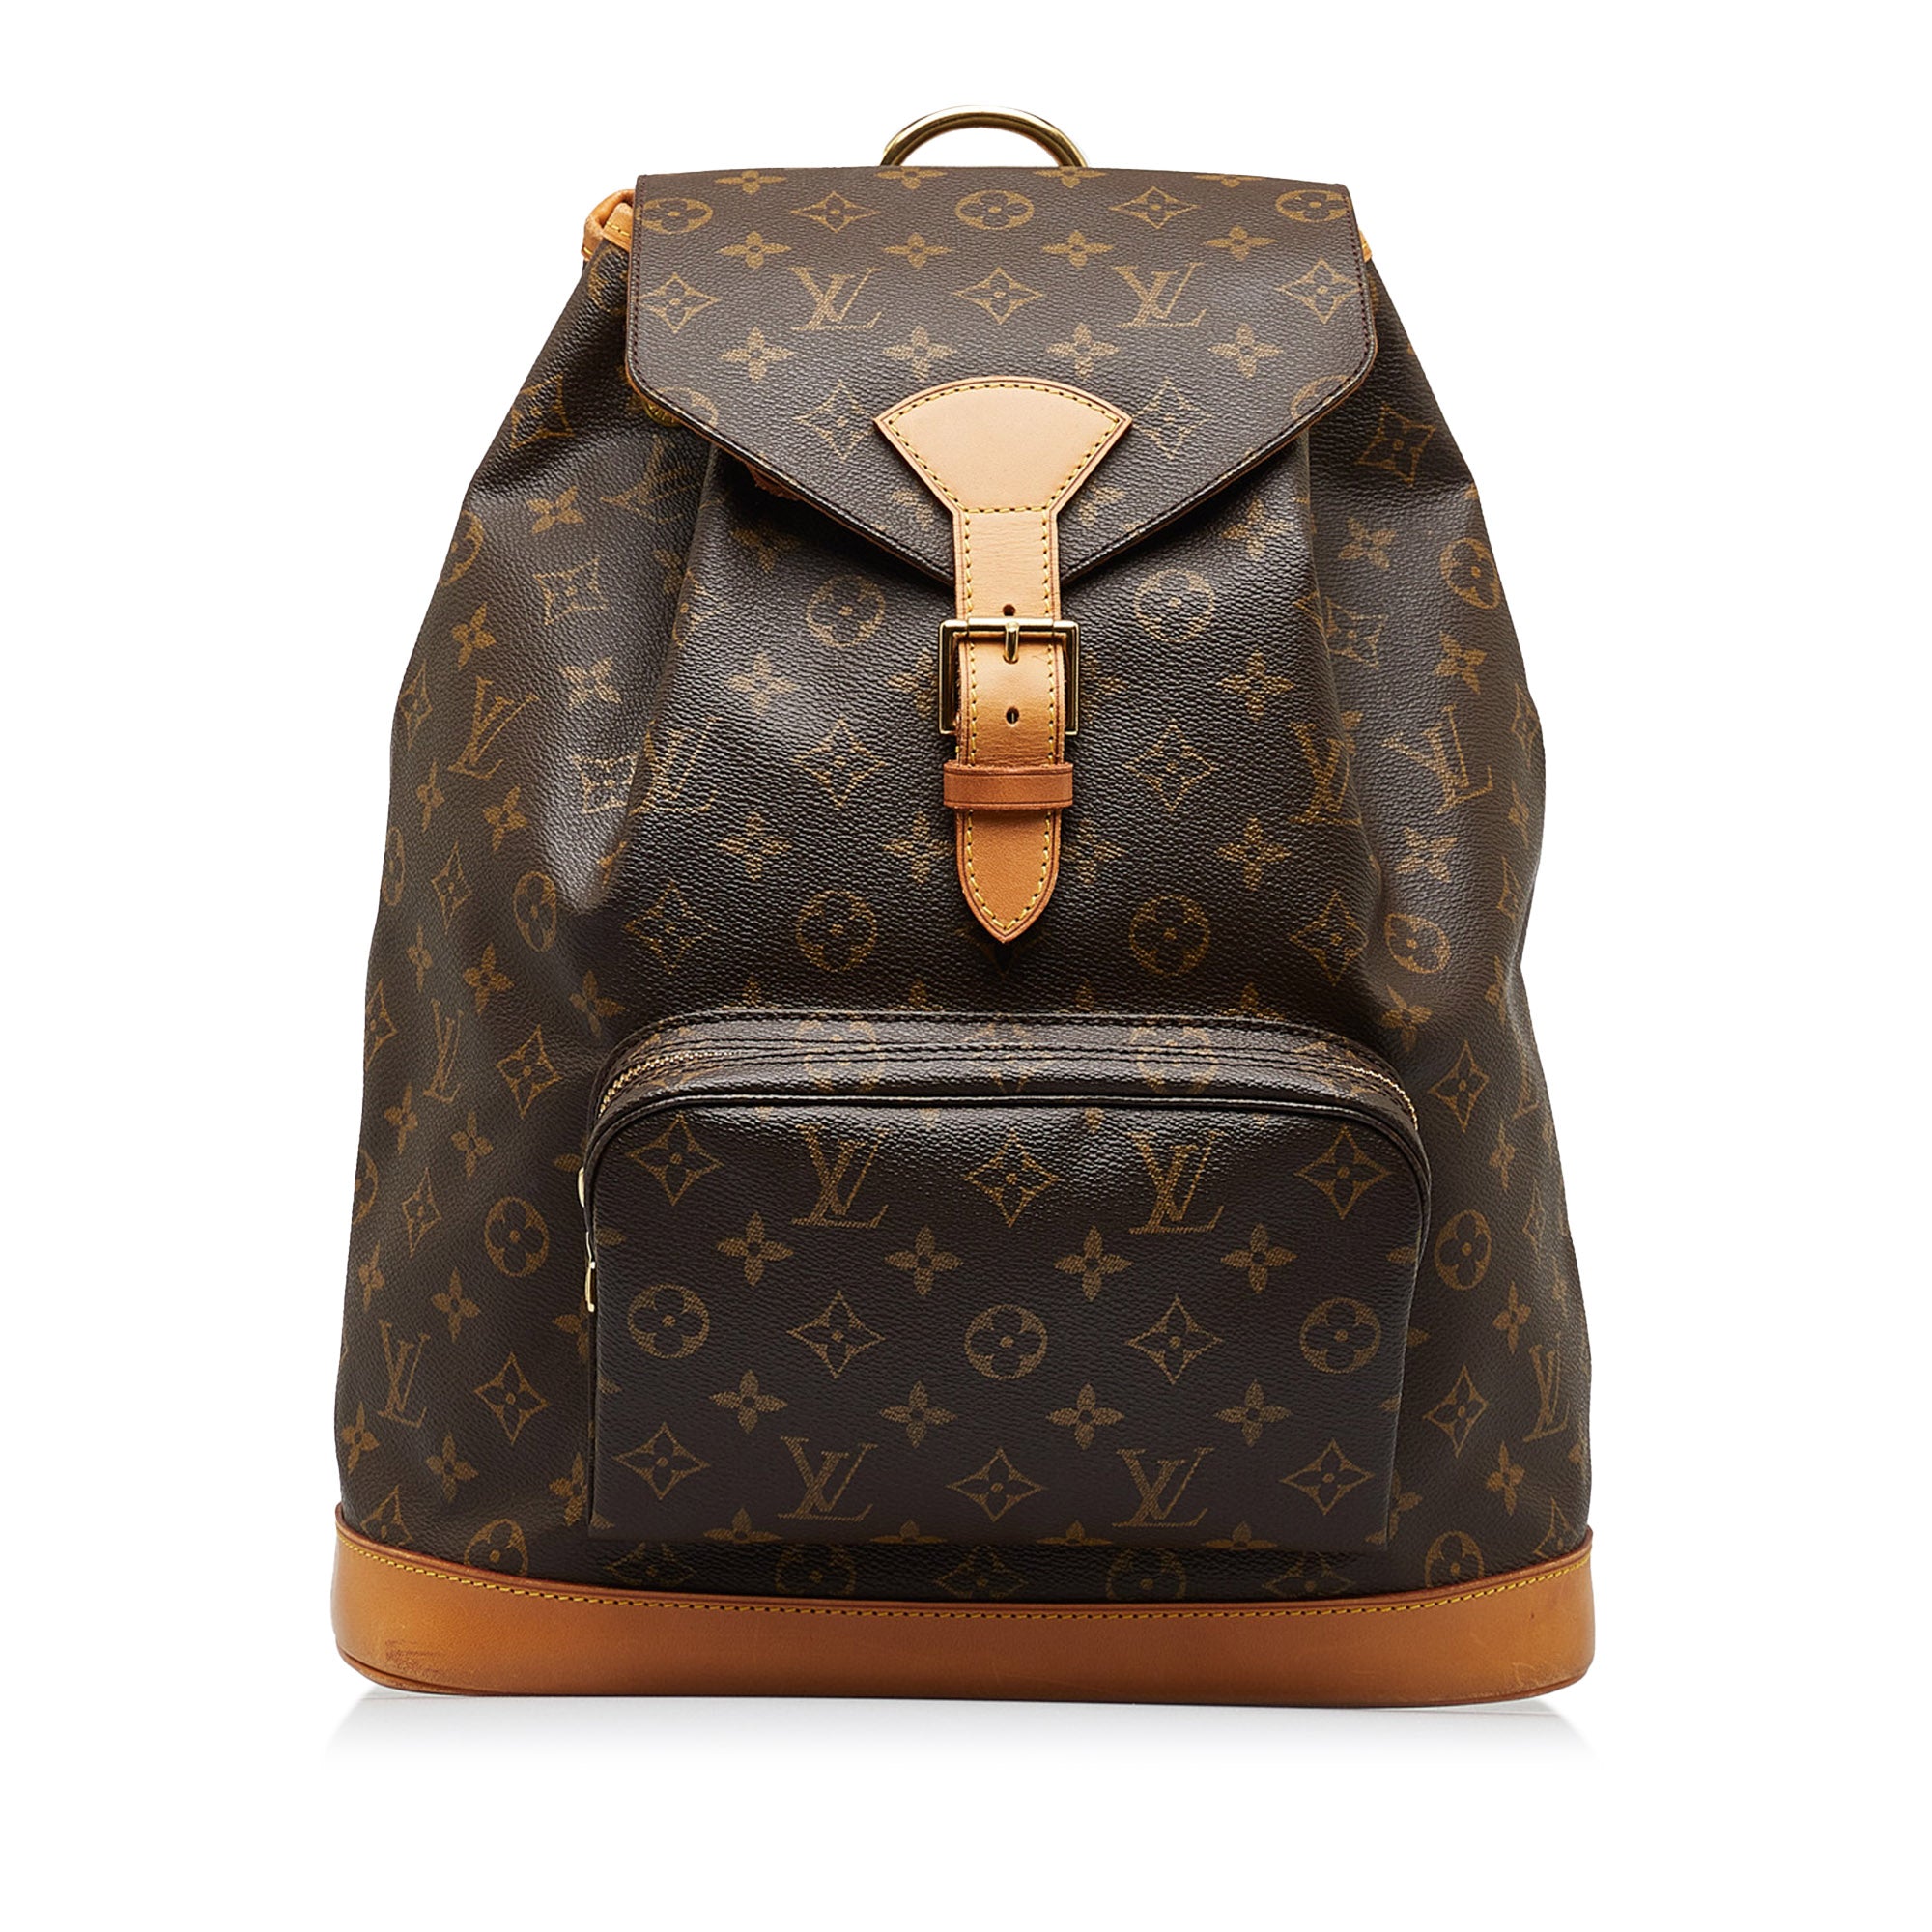 Louis Vuitton Montsouris Gm Brown Canvas Backpack Bag (Pre-Owned)